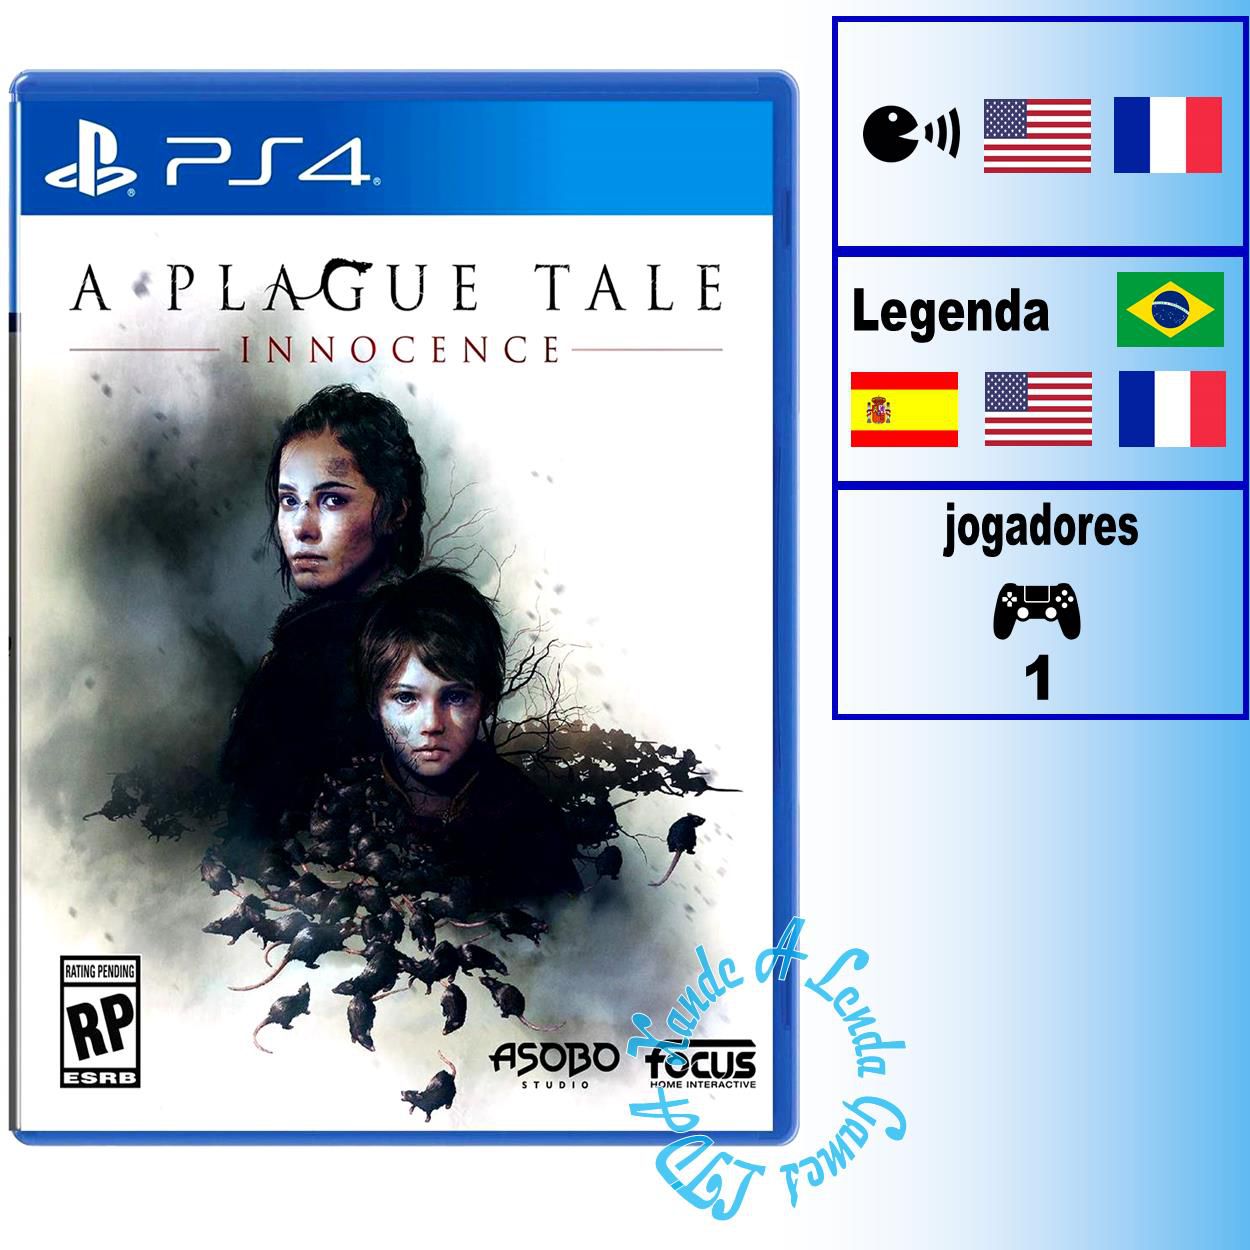 A Plague Tale Innocence, PS5 / PS4 / XBOX ONE Game